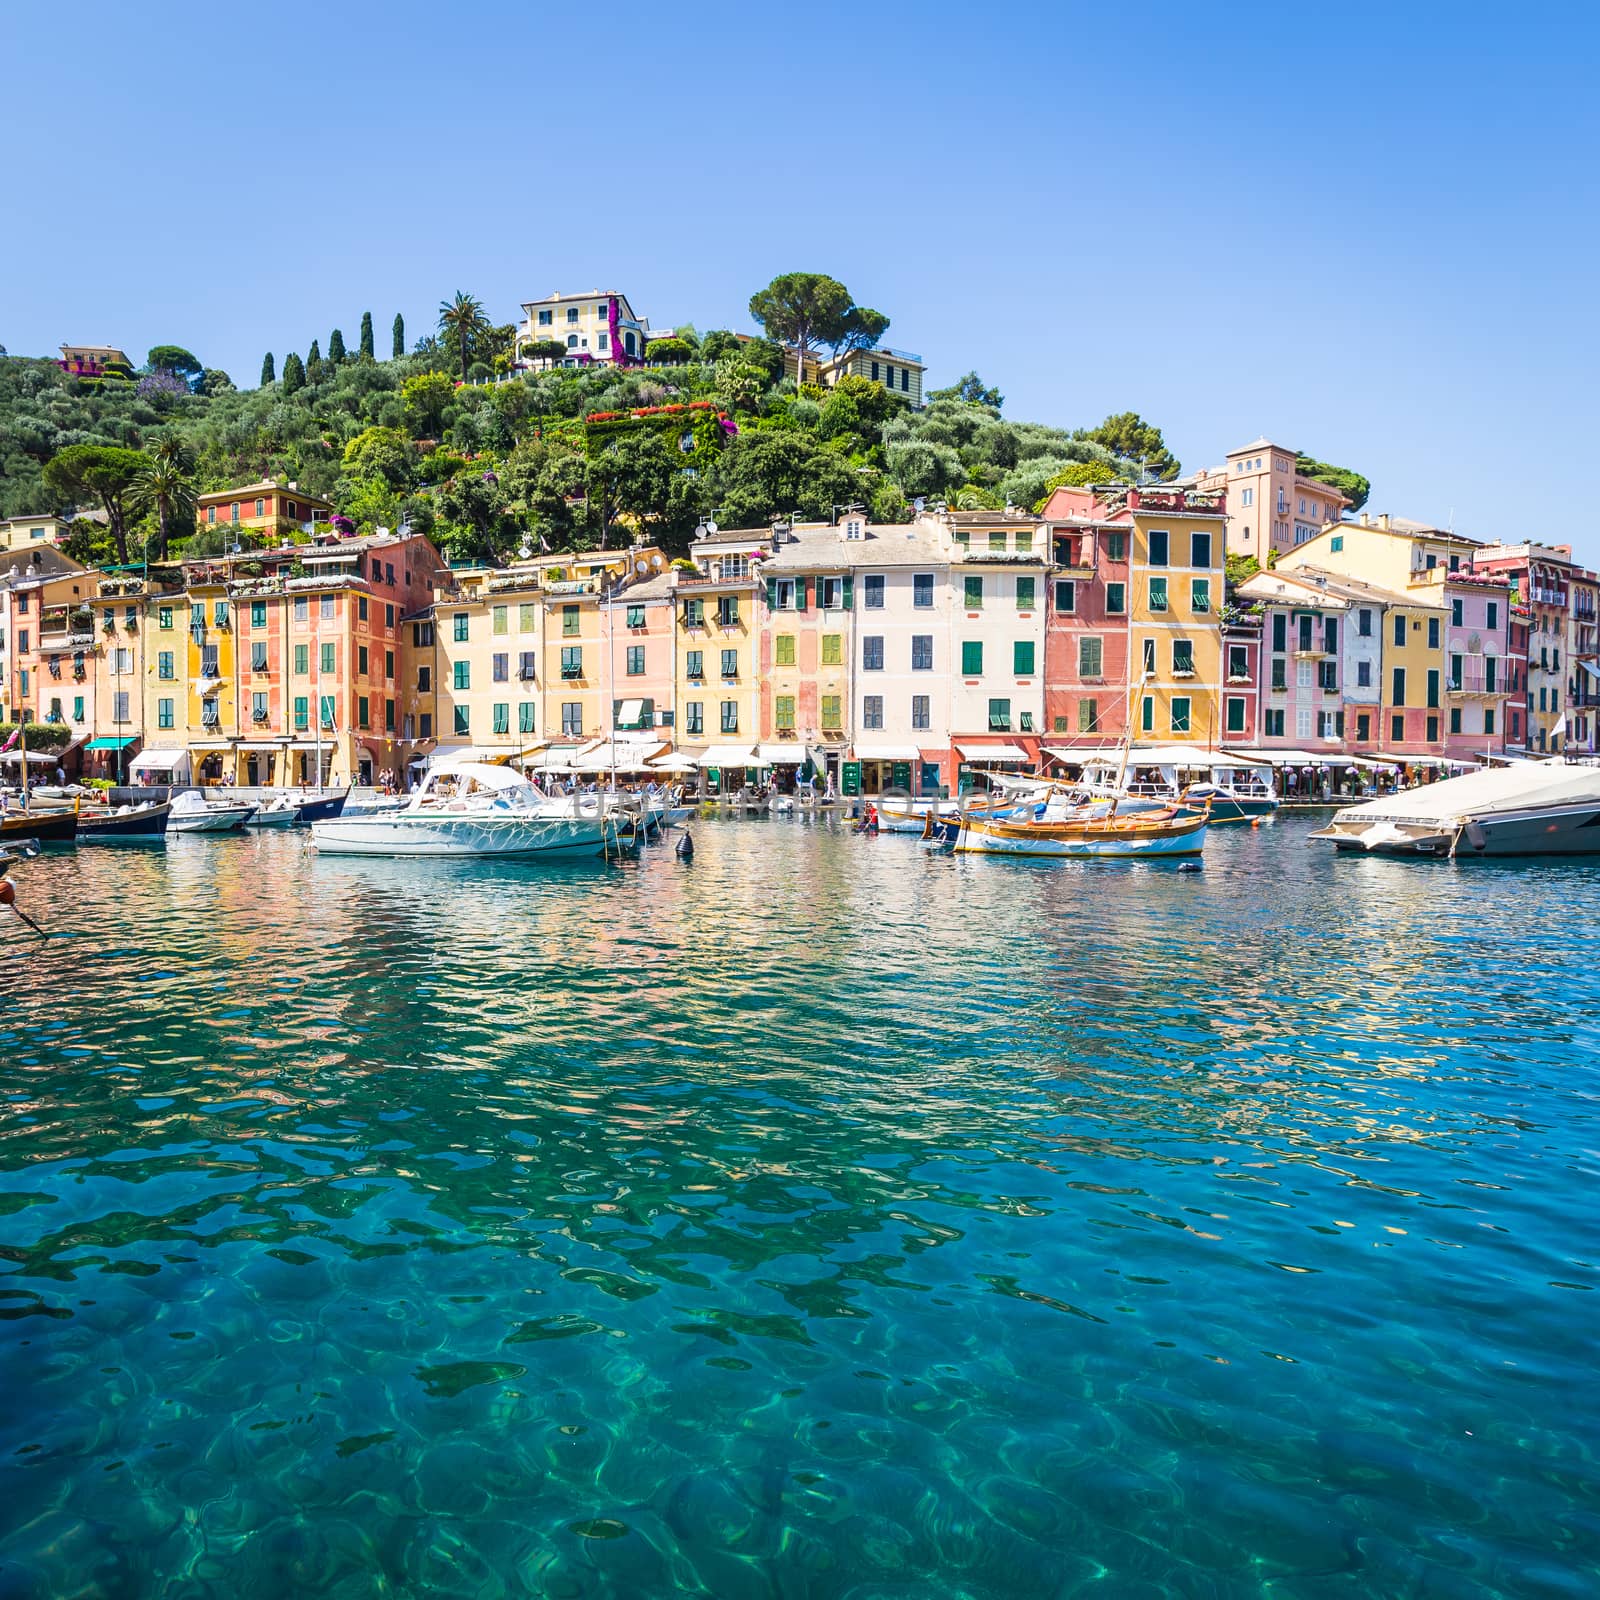 Close to Cinque Terre area, Portofino is one of the most beautiful and fashion town.